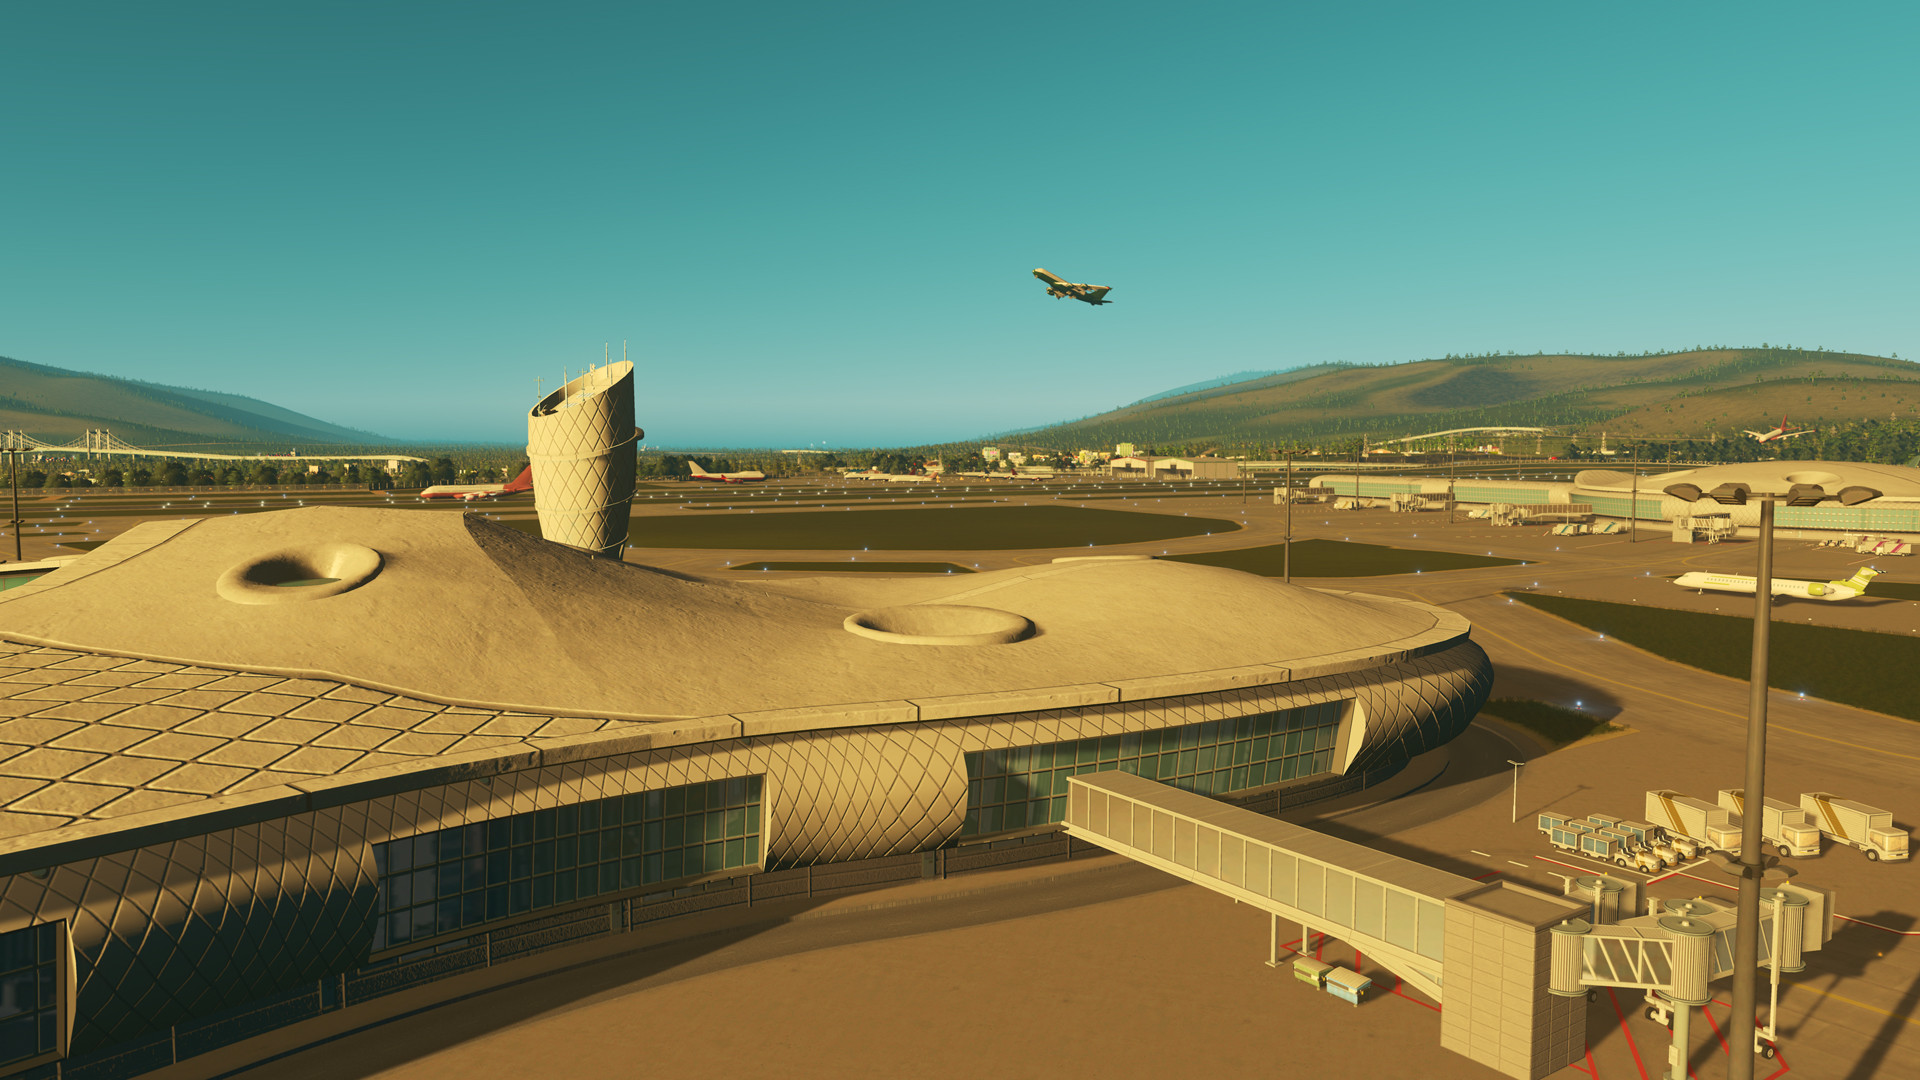 Cities Skylines Airports Screenshot Showing the Bridge to the Plane and Another Plane Taking Off at a Distance